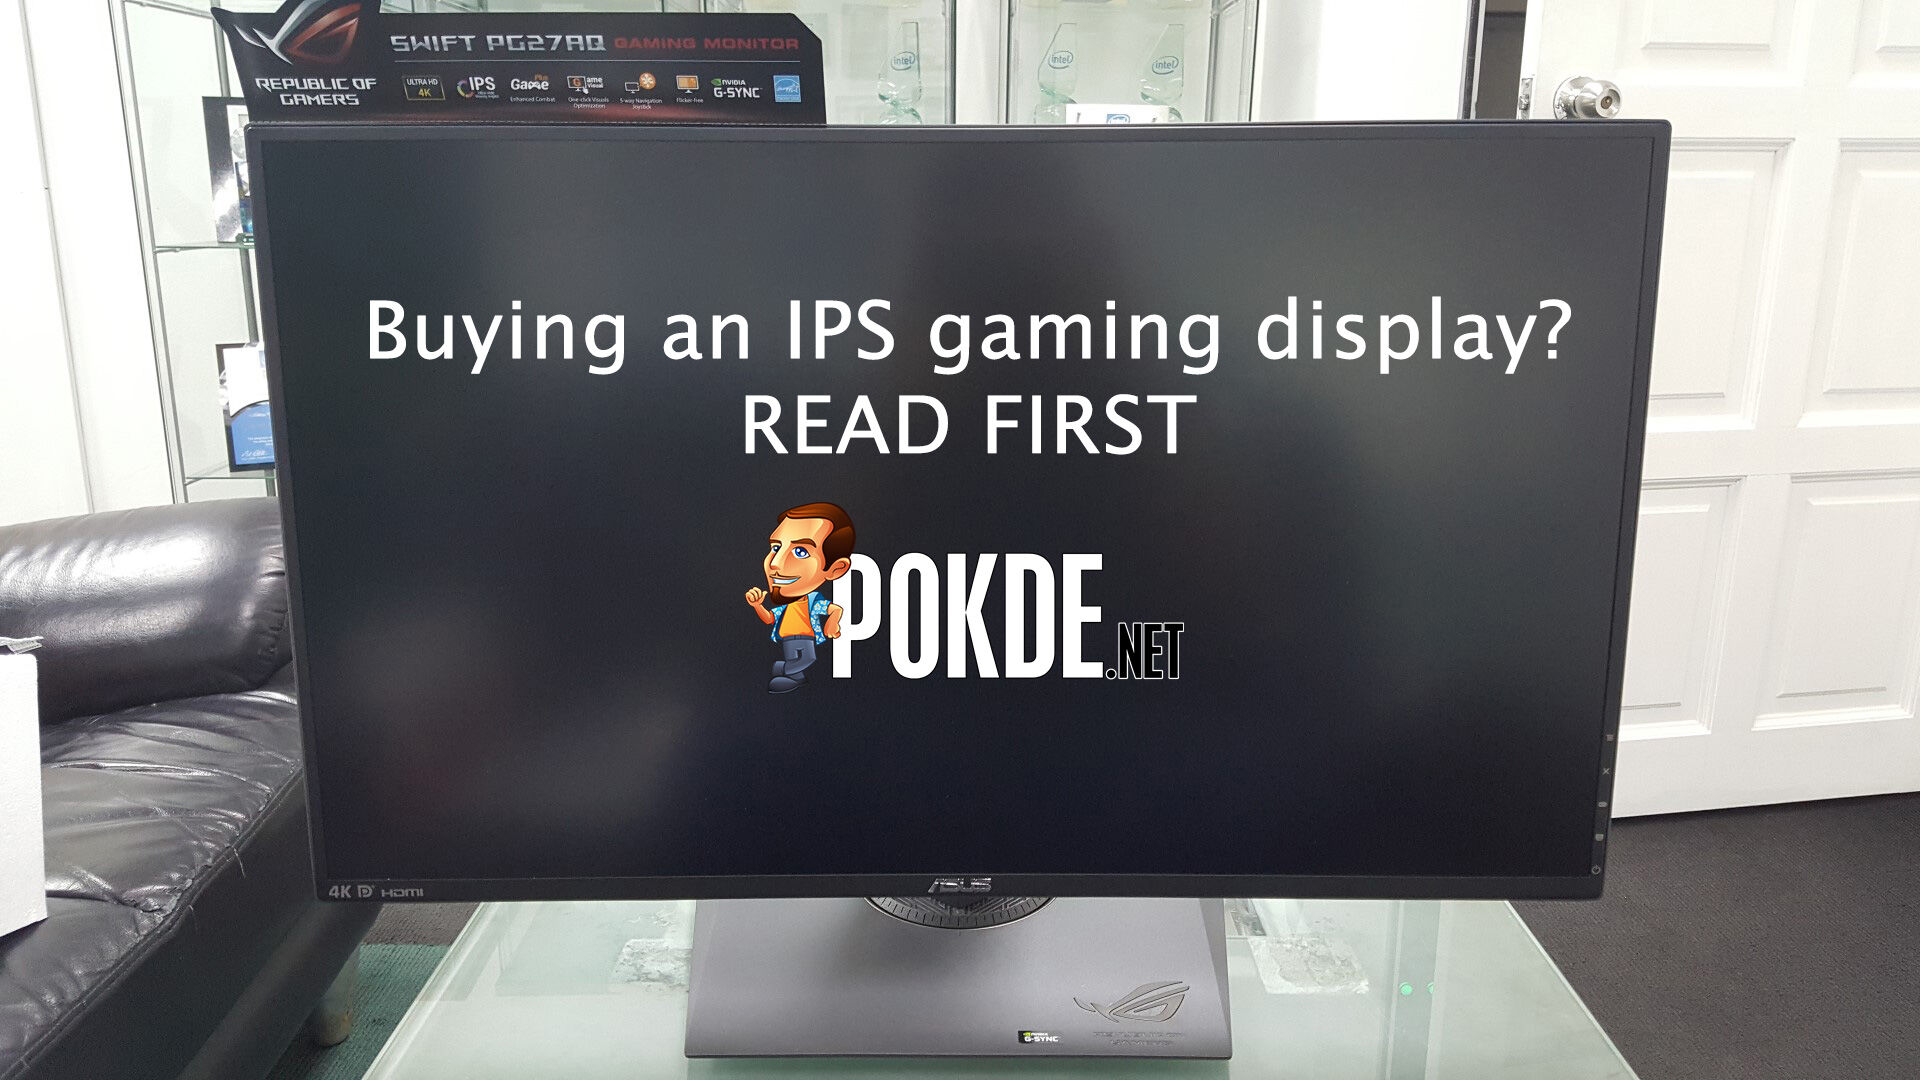 Buying an "IPS gaming display"? Read this first... Seriously! 19